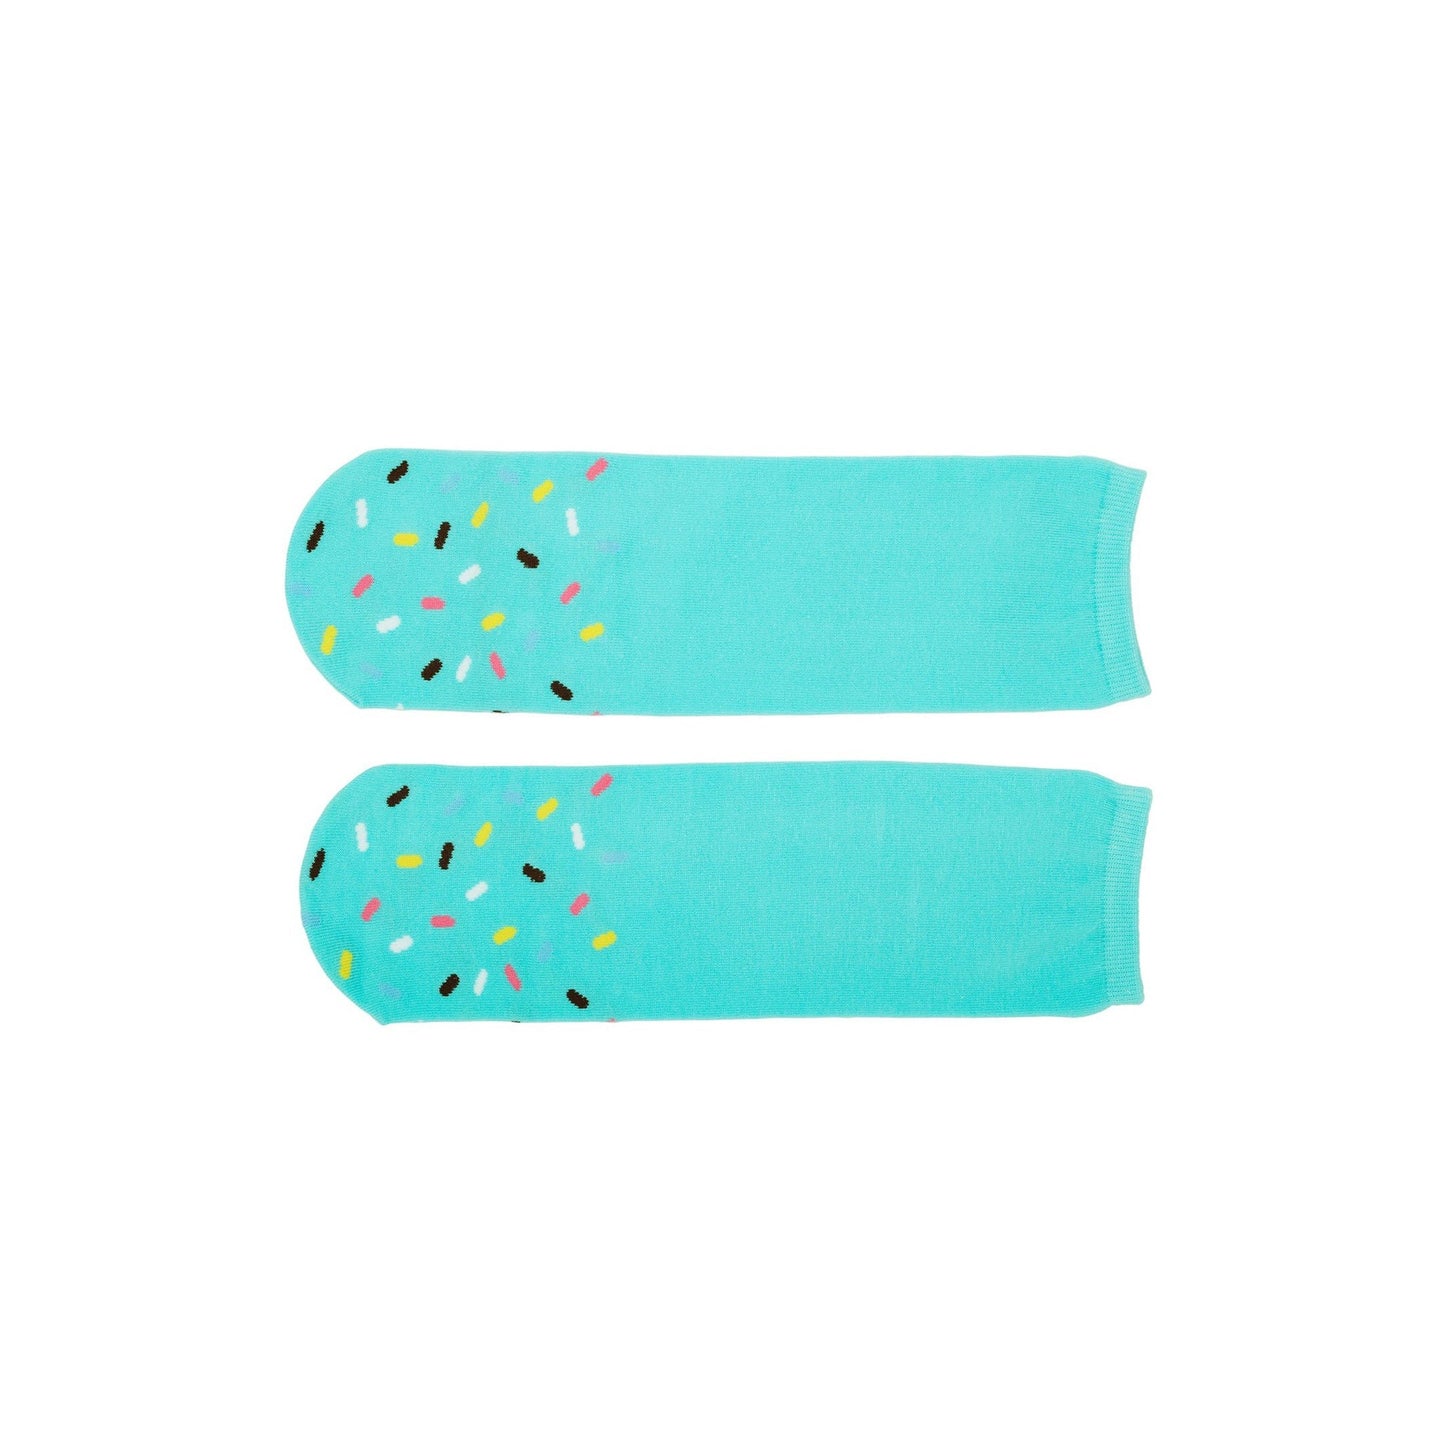 Ice Pop Socks in Blue Raspberry | Cute Women's Socks Rolled Up as an Ice Pop for Gifting